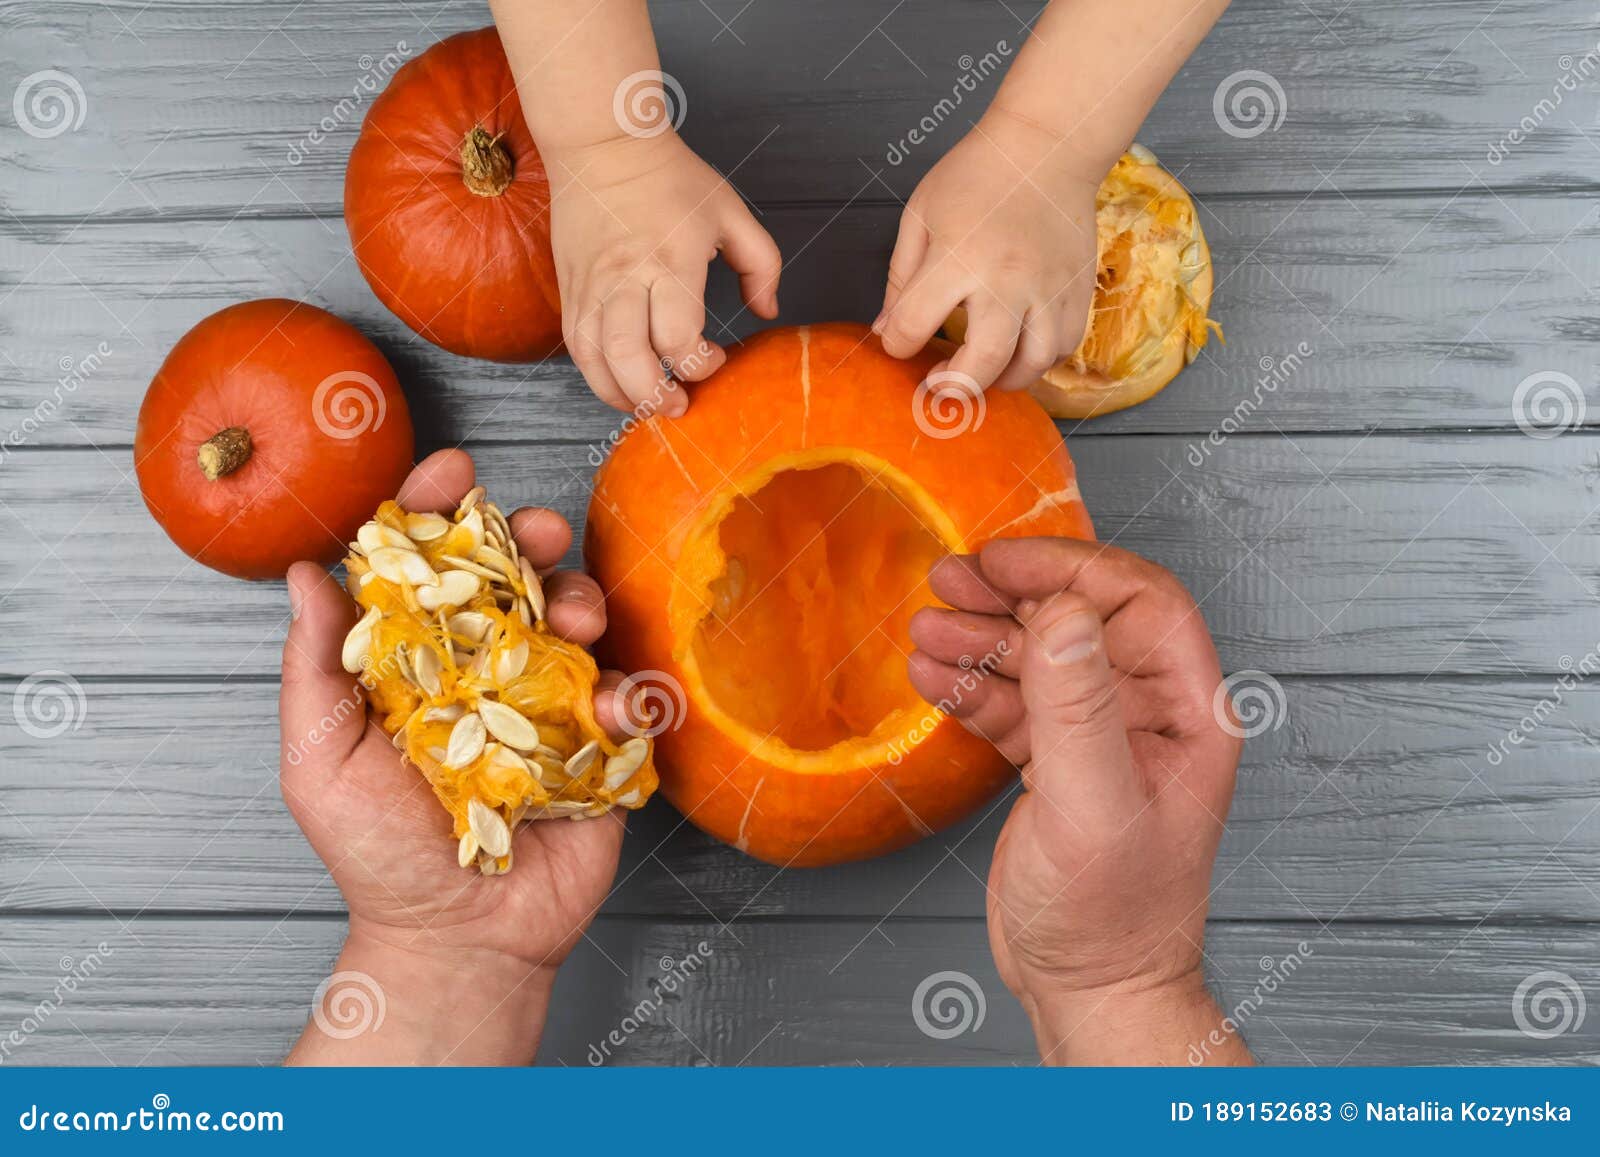 hands of a daughter and father who pulls seeds and fibrous material from a pumpkin before carving for halloween. party